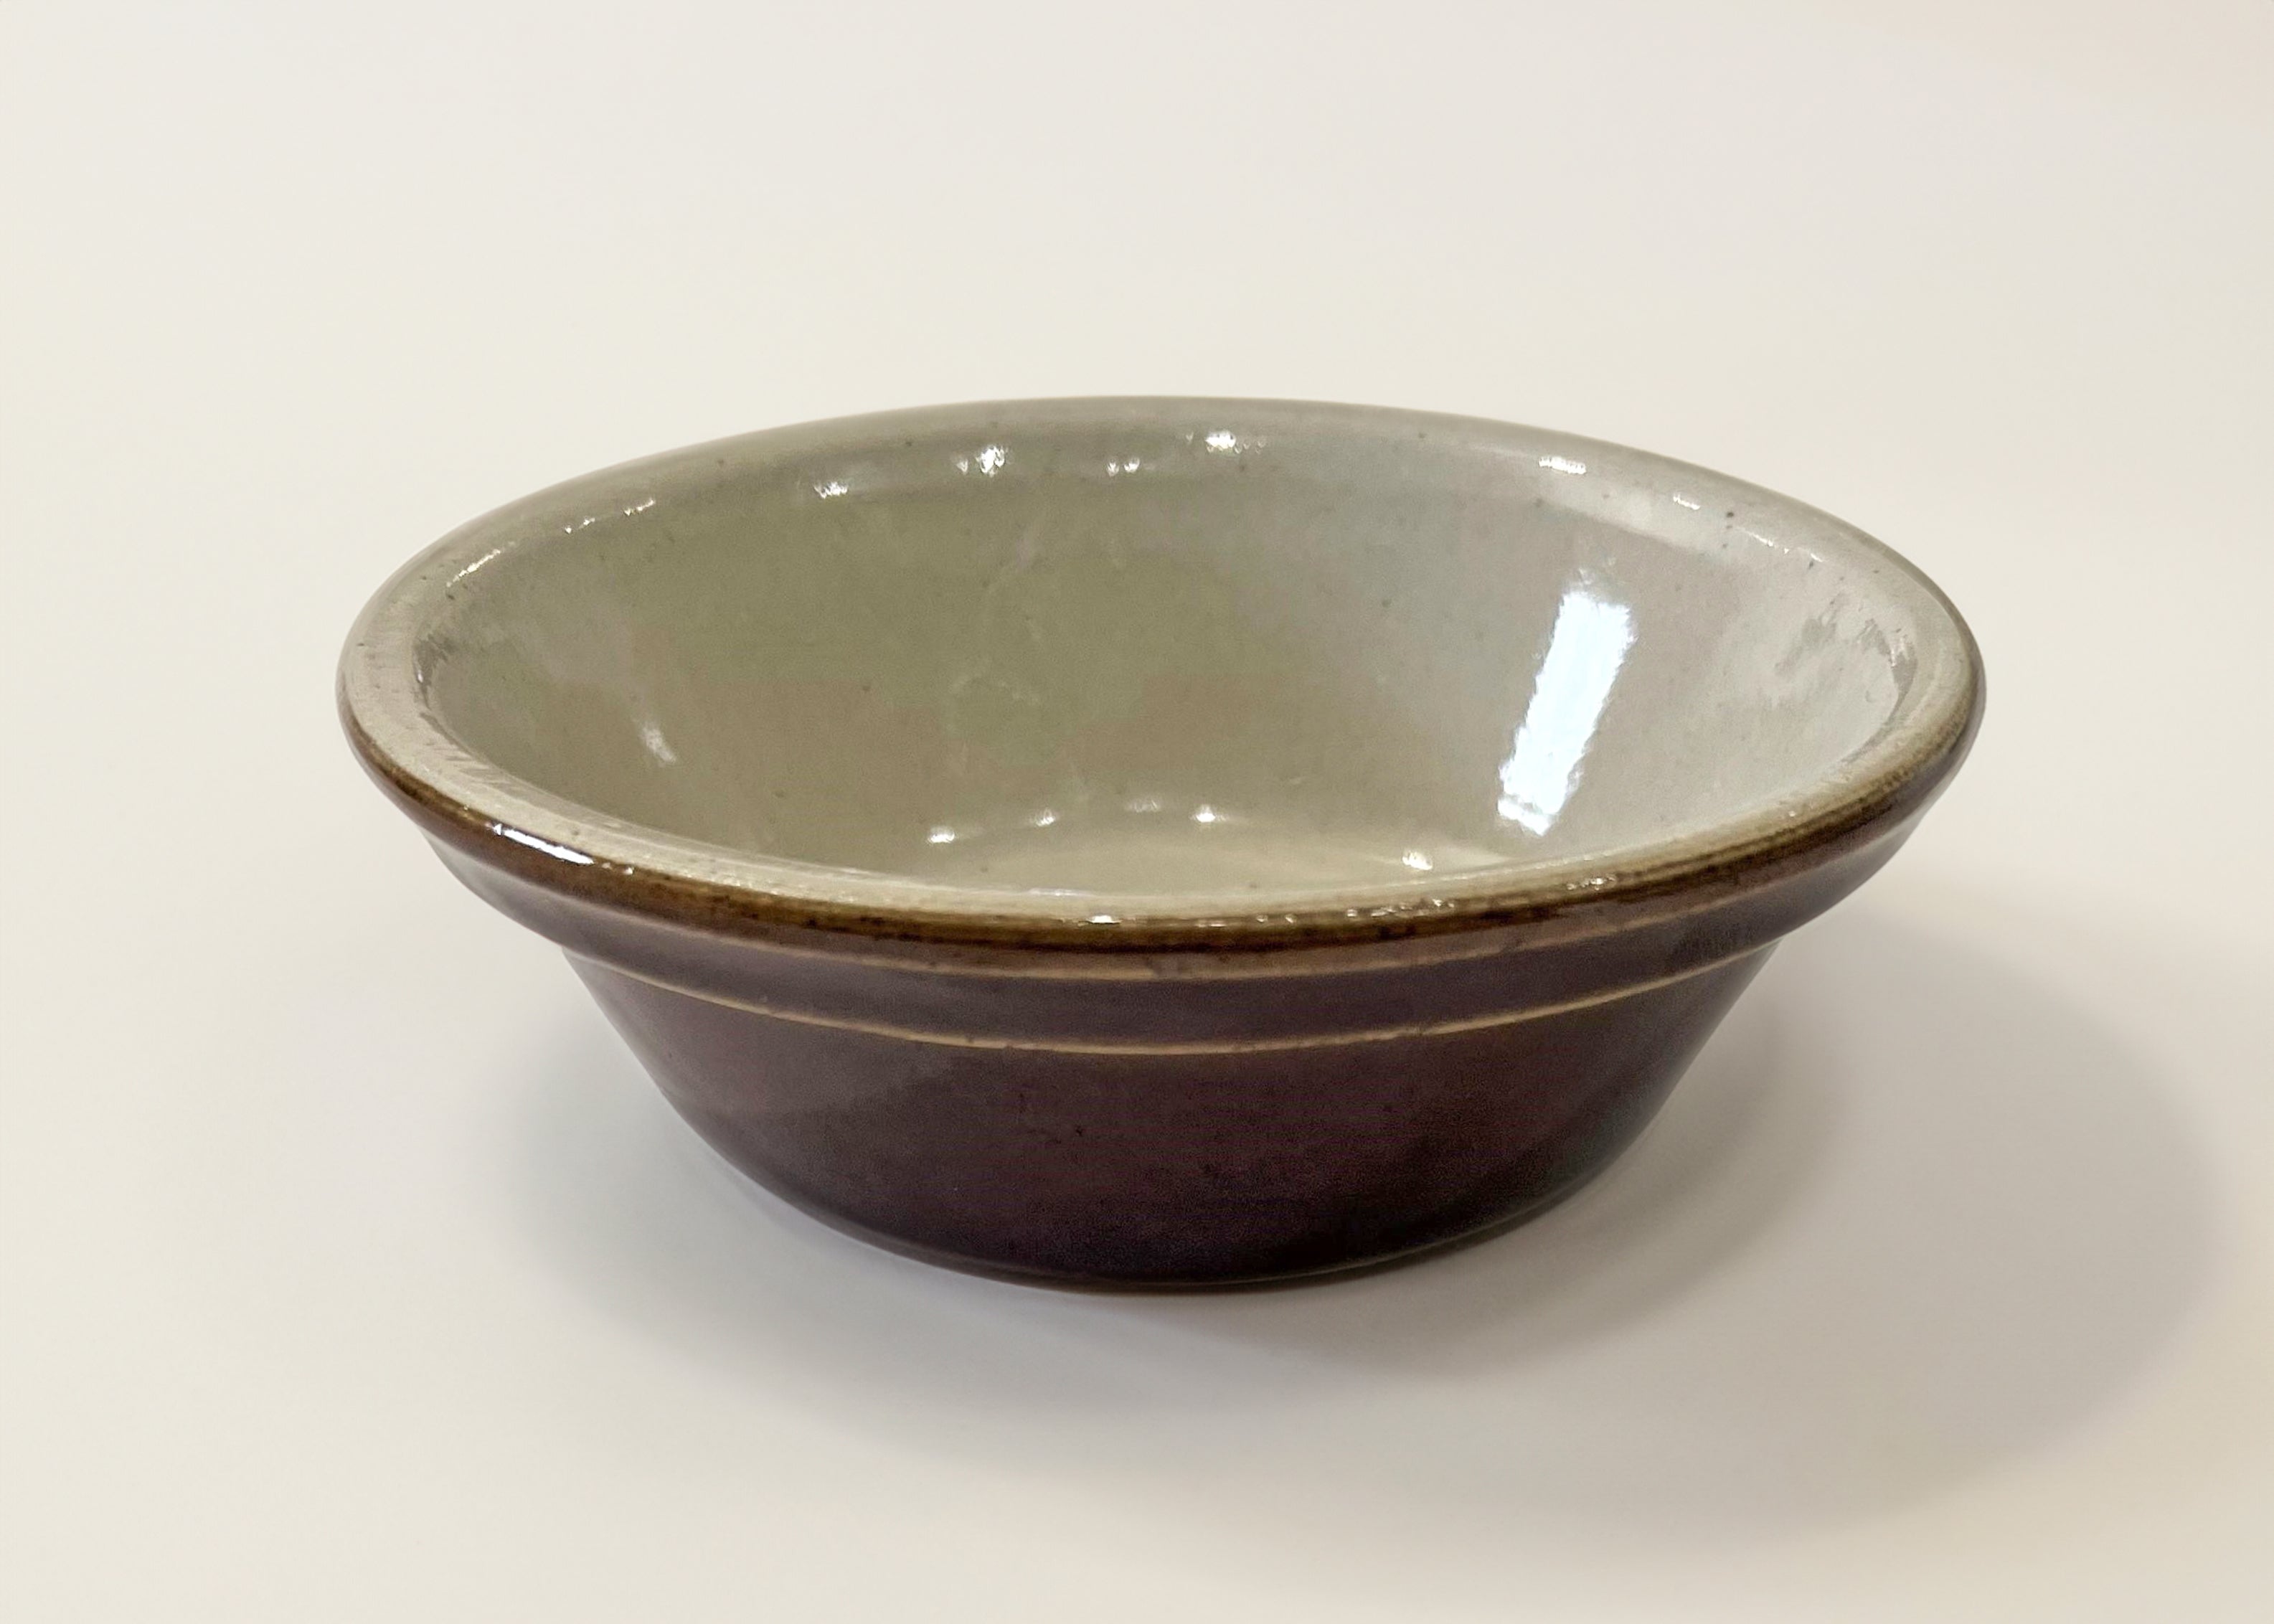 Poterie Renault Vintage French Shallow Bowl - Brown